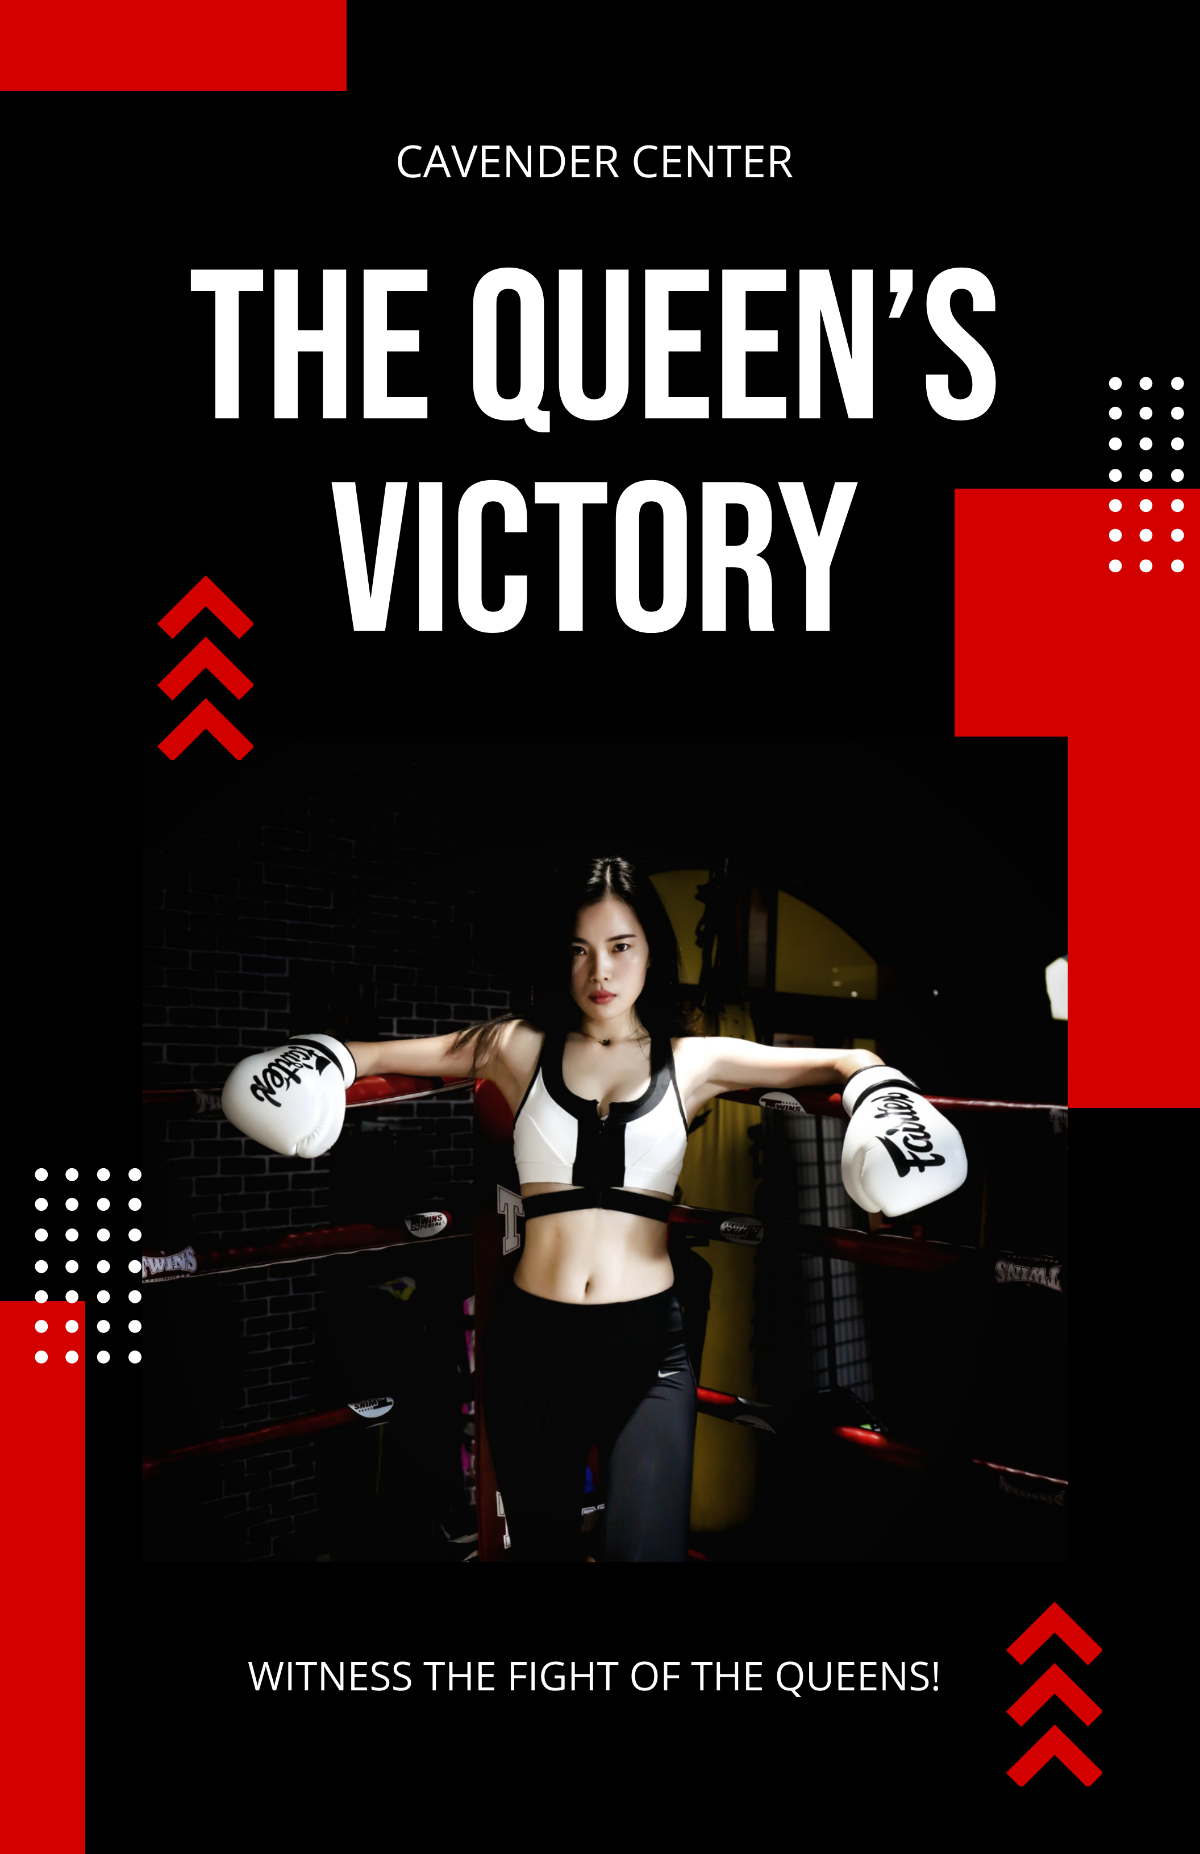 Women's Boxing Poster Template